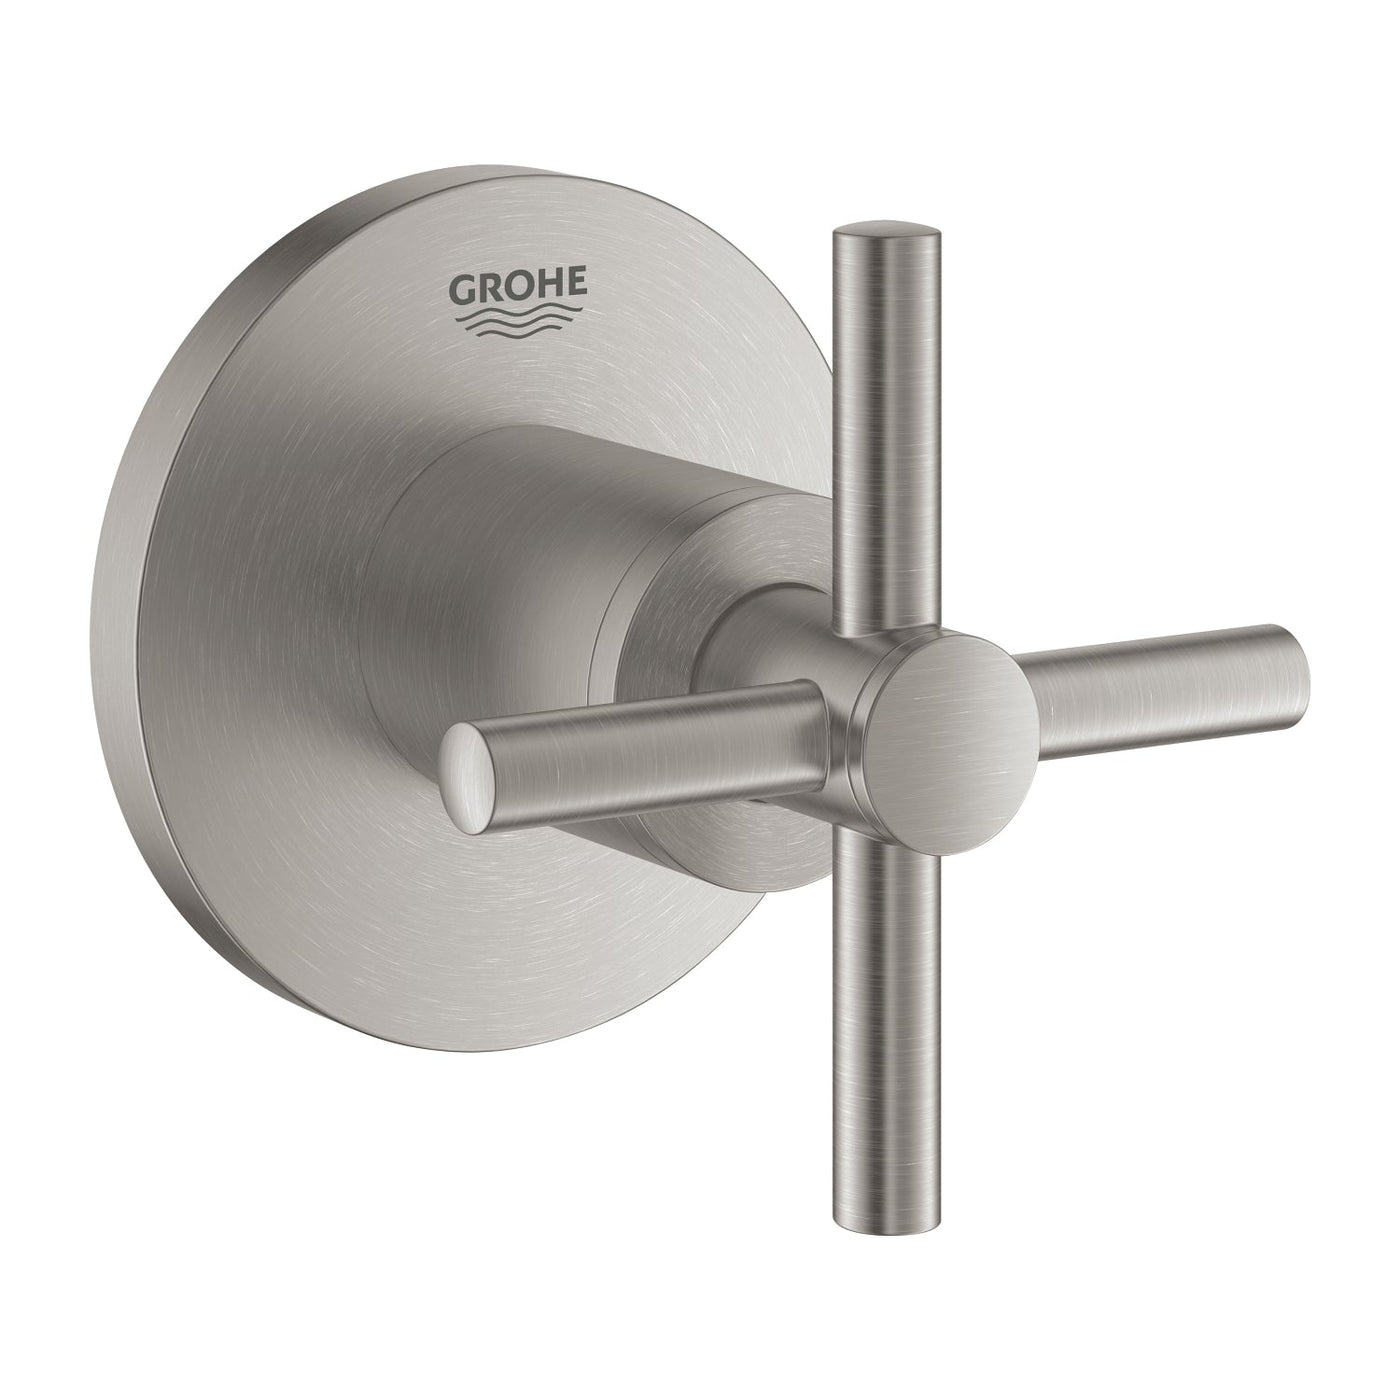 Grohe Supersteel Atrio Concealed stop-valve trim - Letta London - Thermostatic Showers